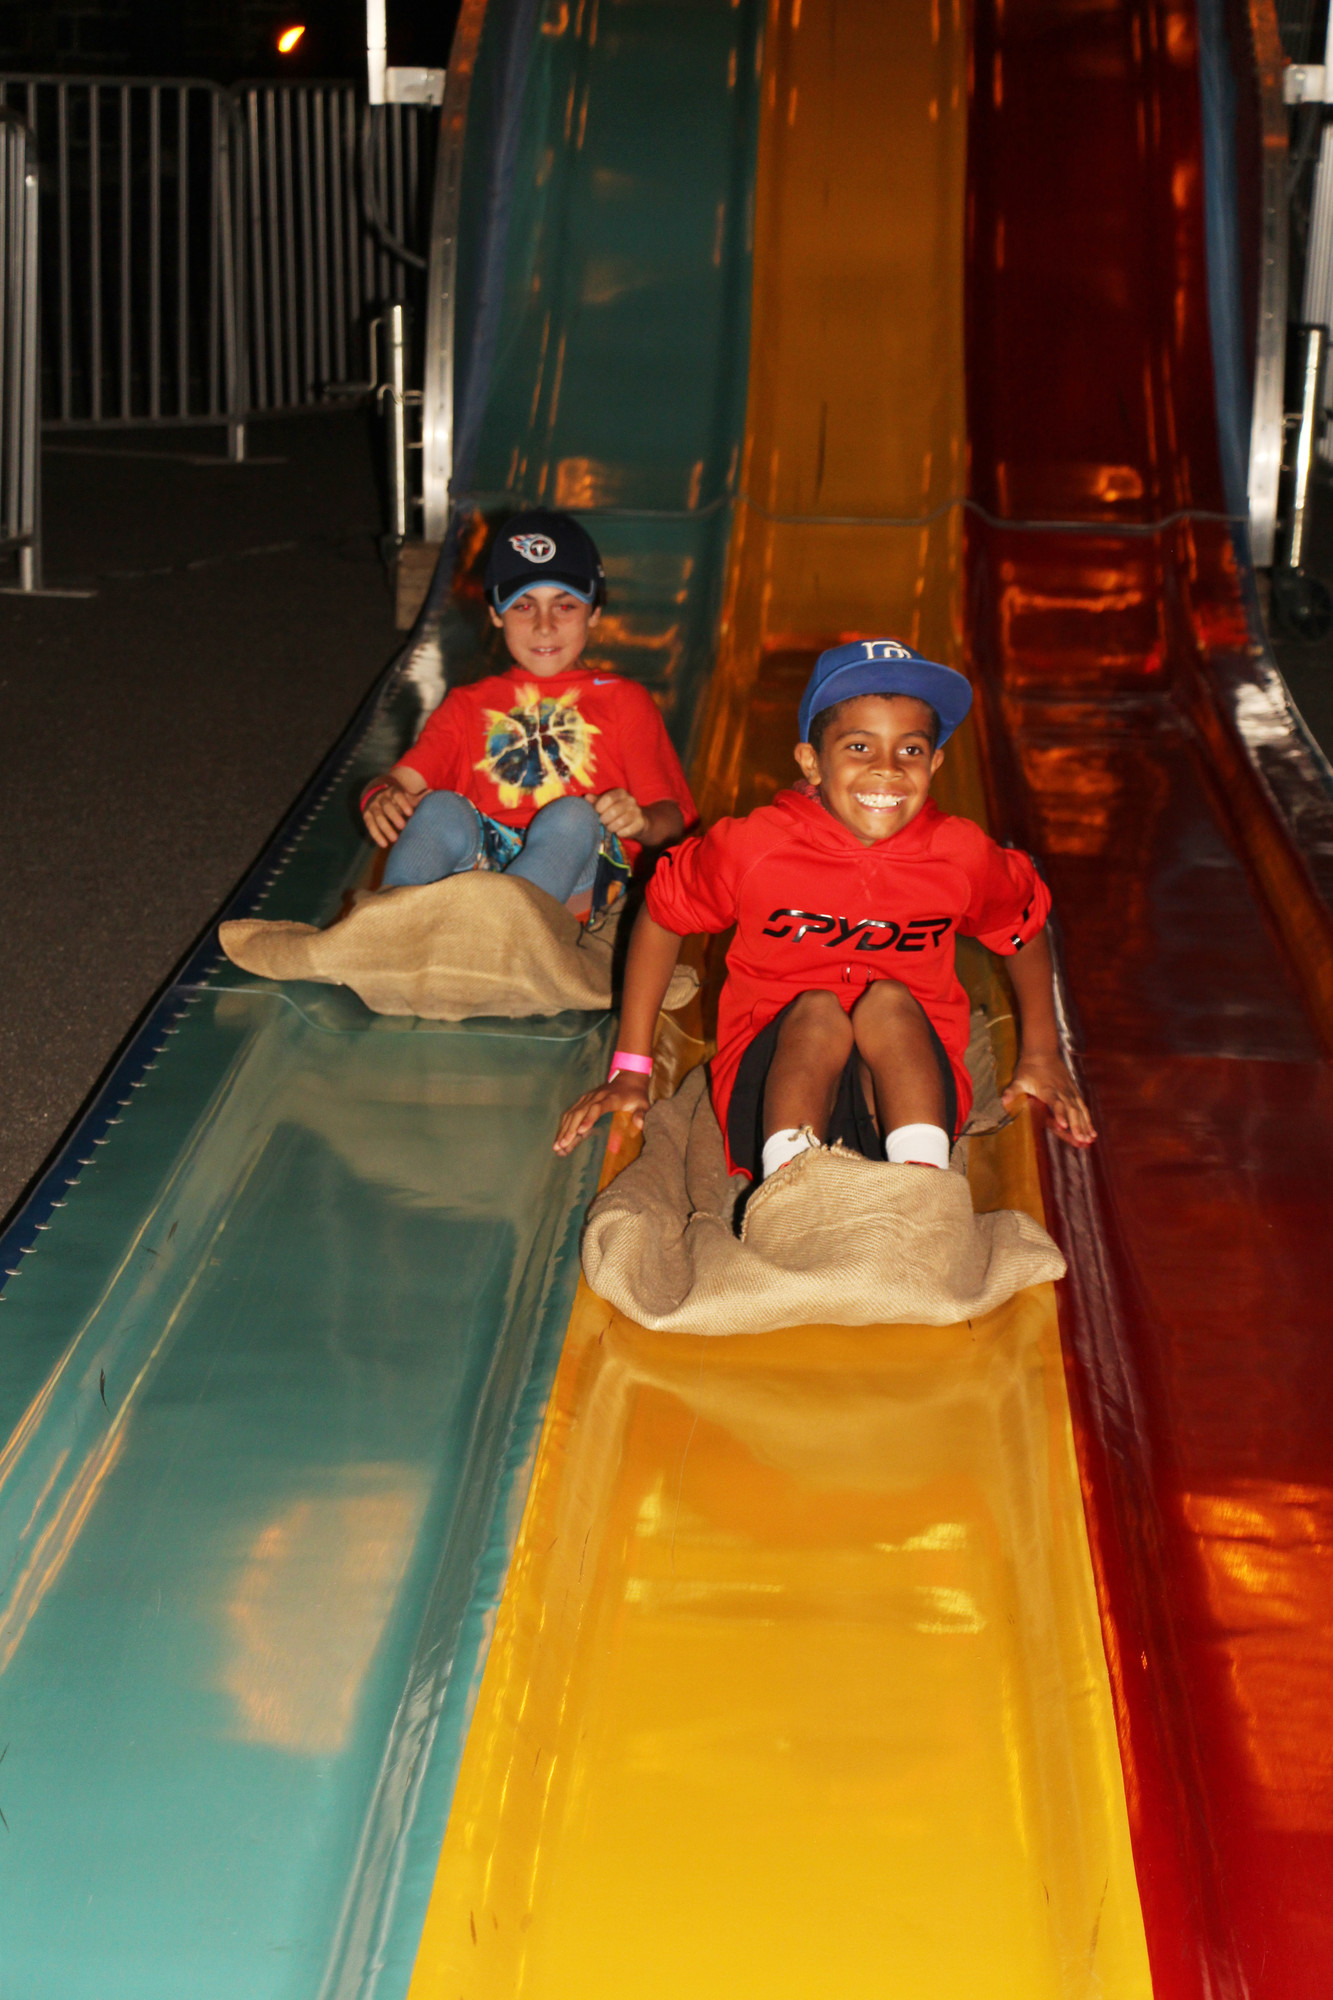 Tyler Ramos, right, and his friend Lucas Borello, each 10 years old, had a blast on the slide.